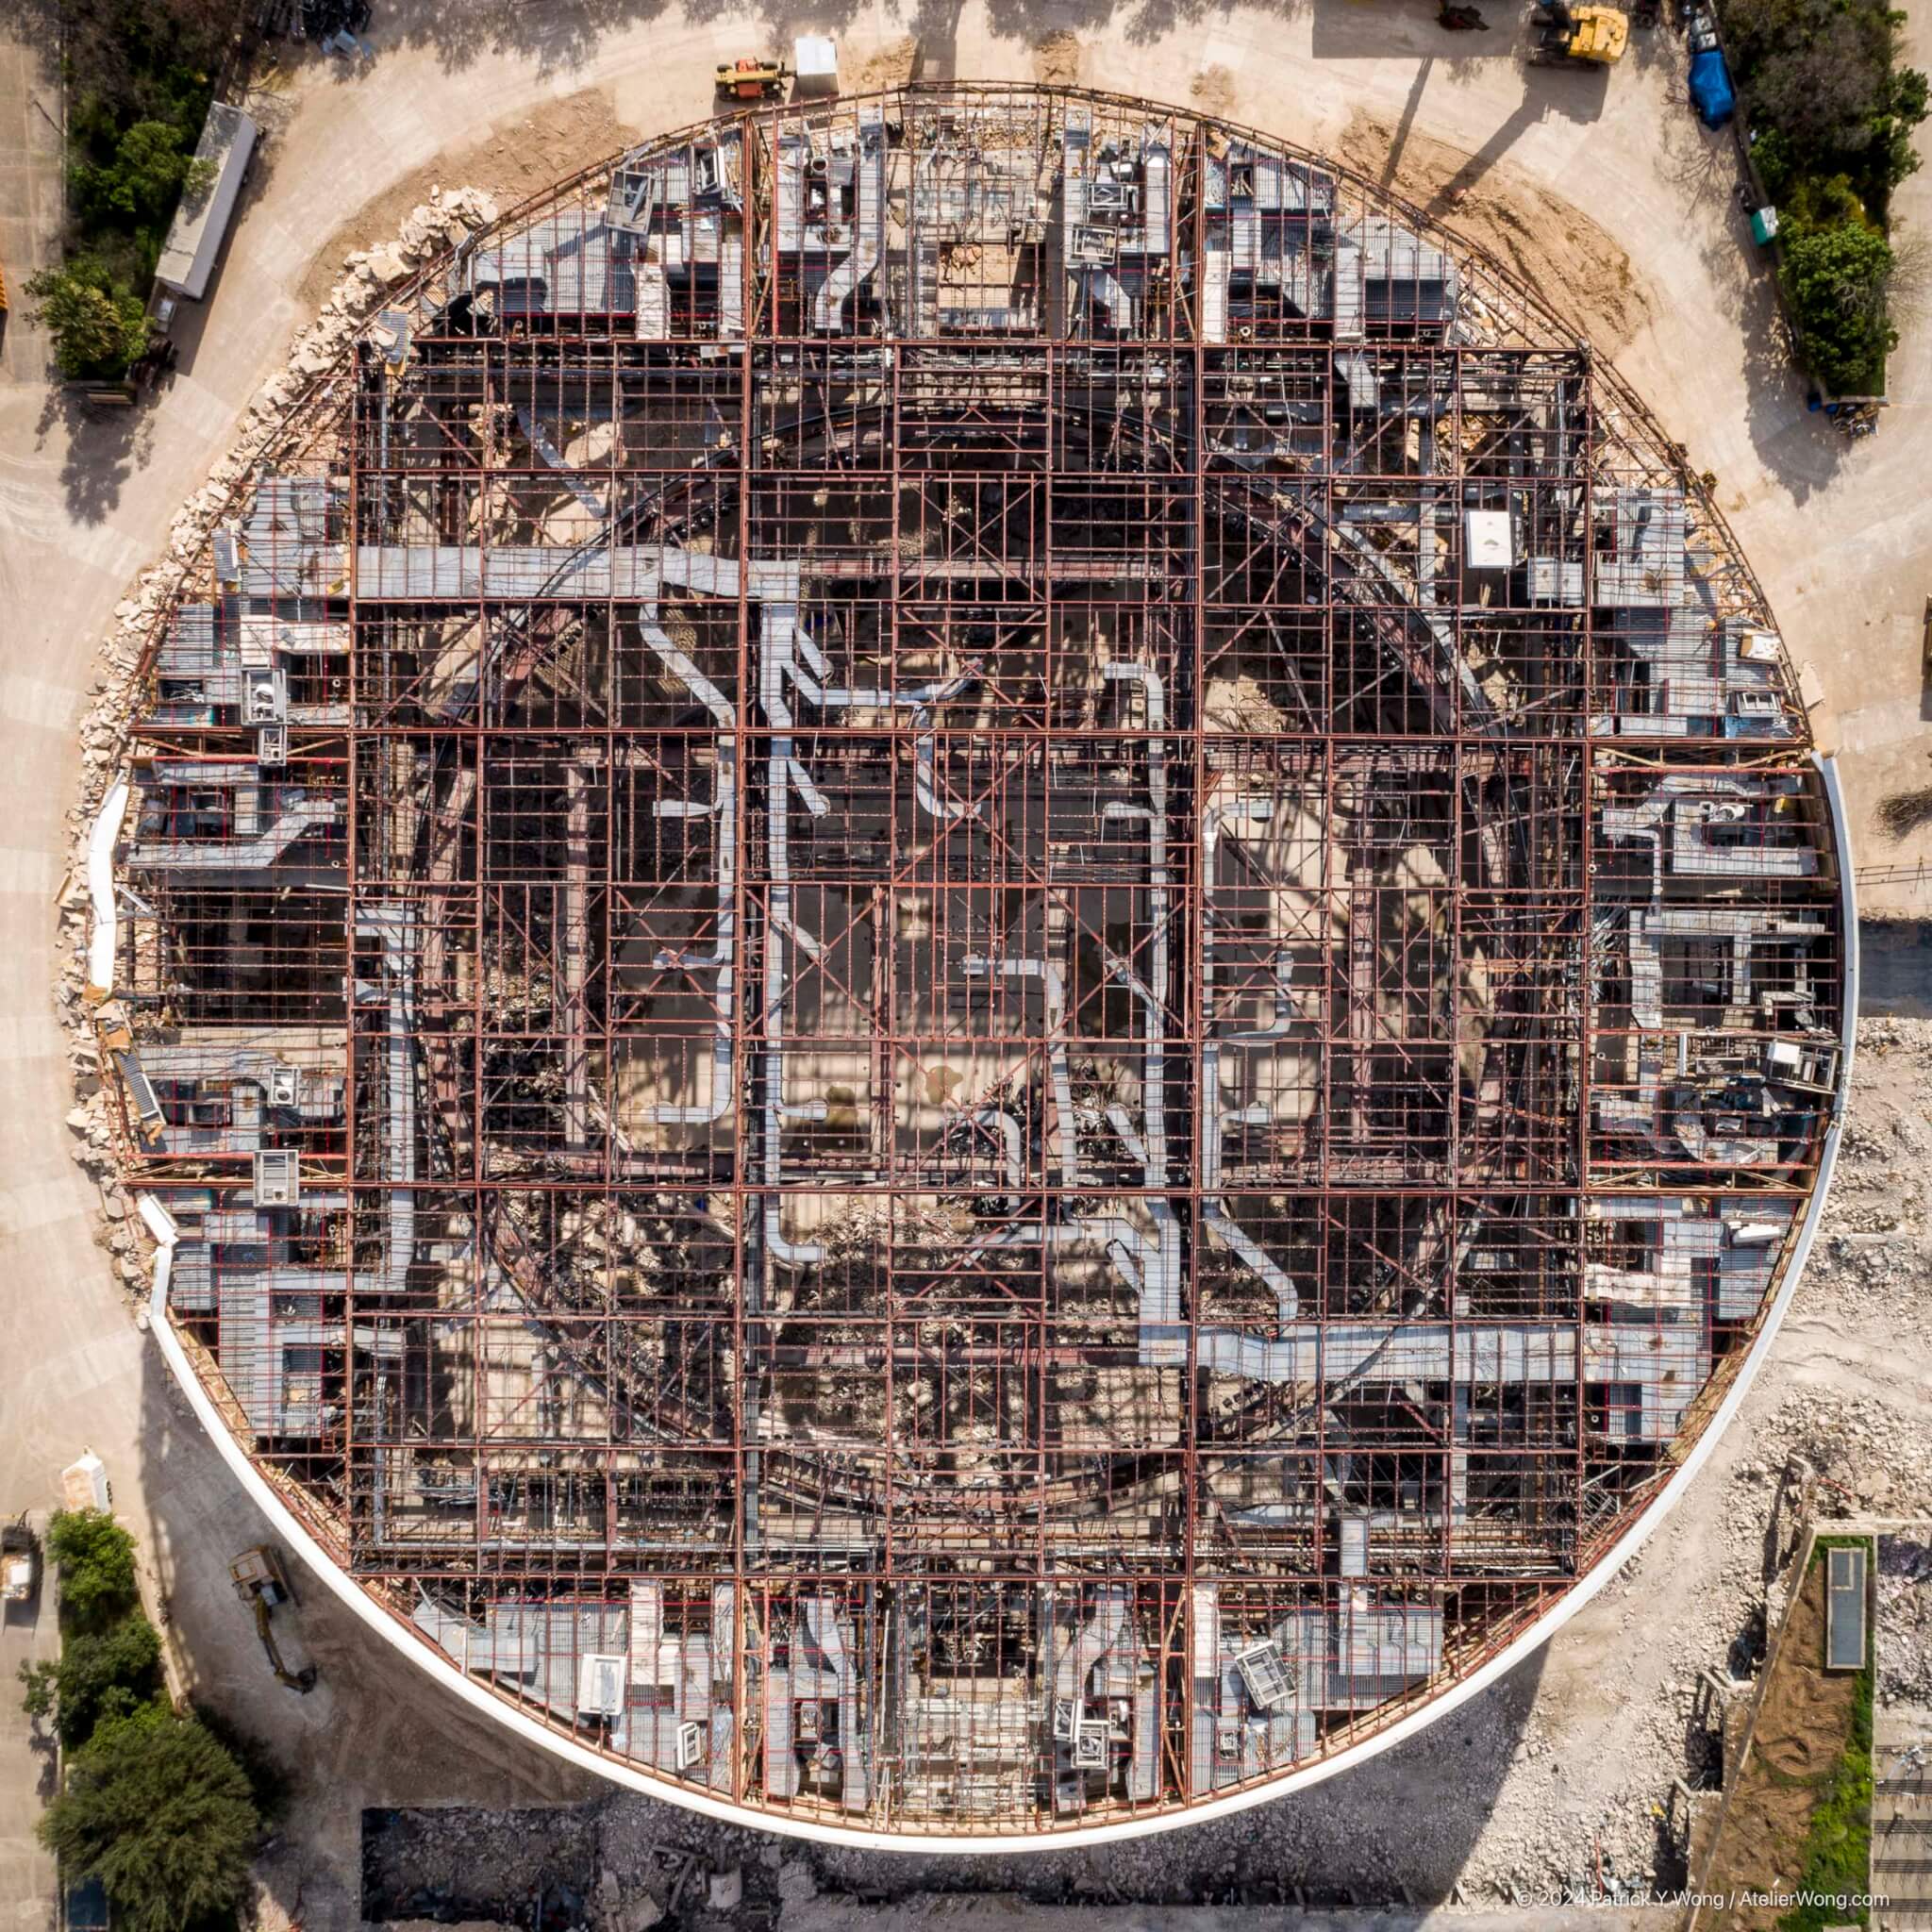 aerial view showing deconstruction